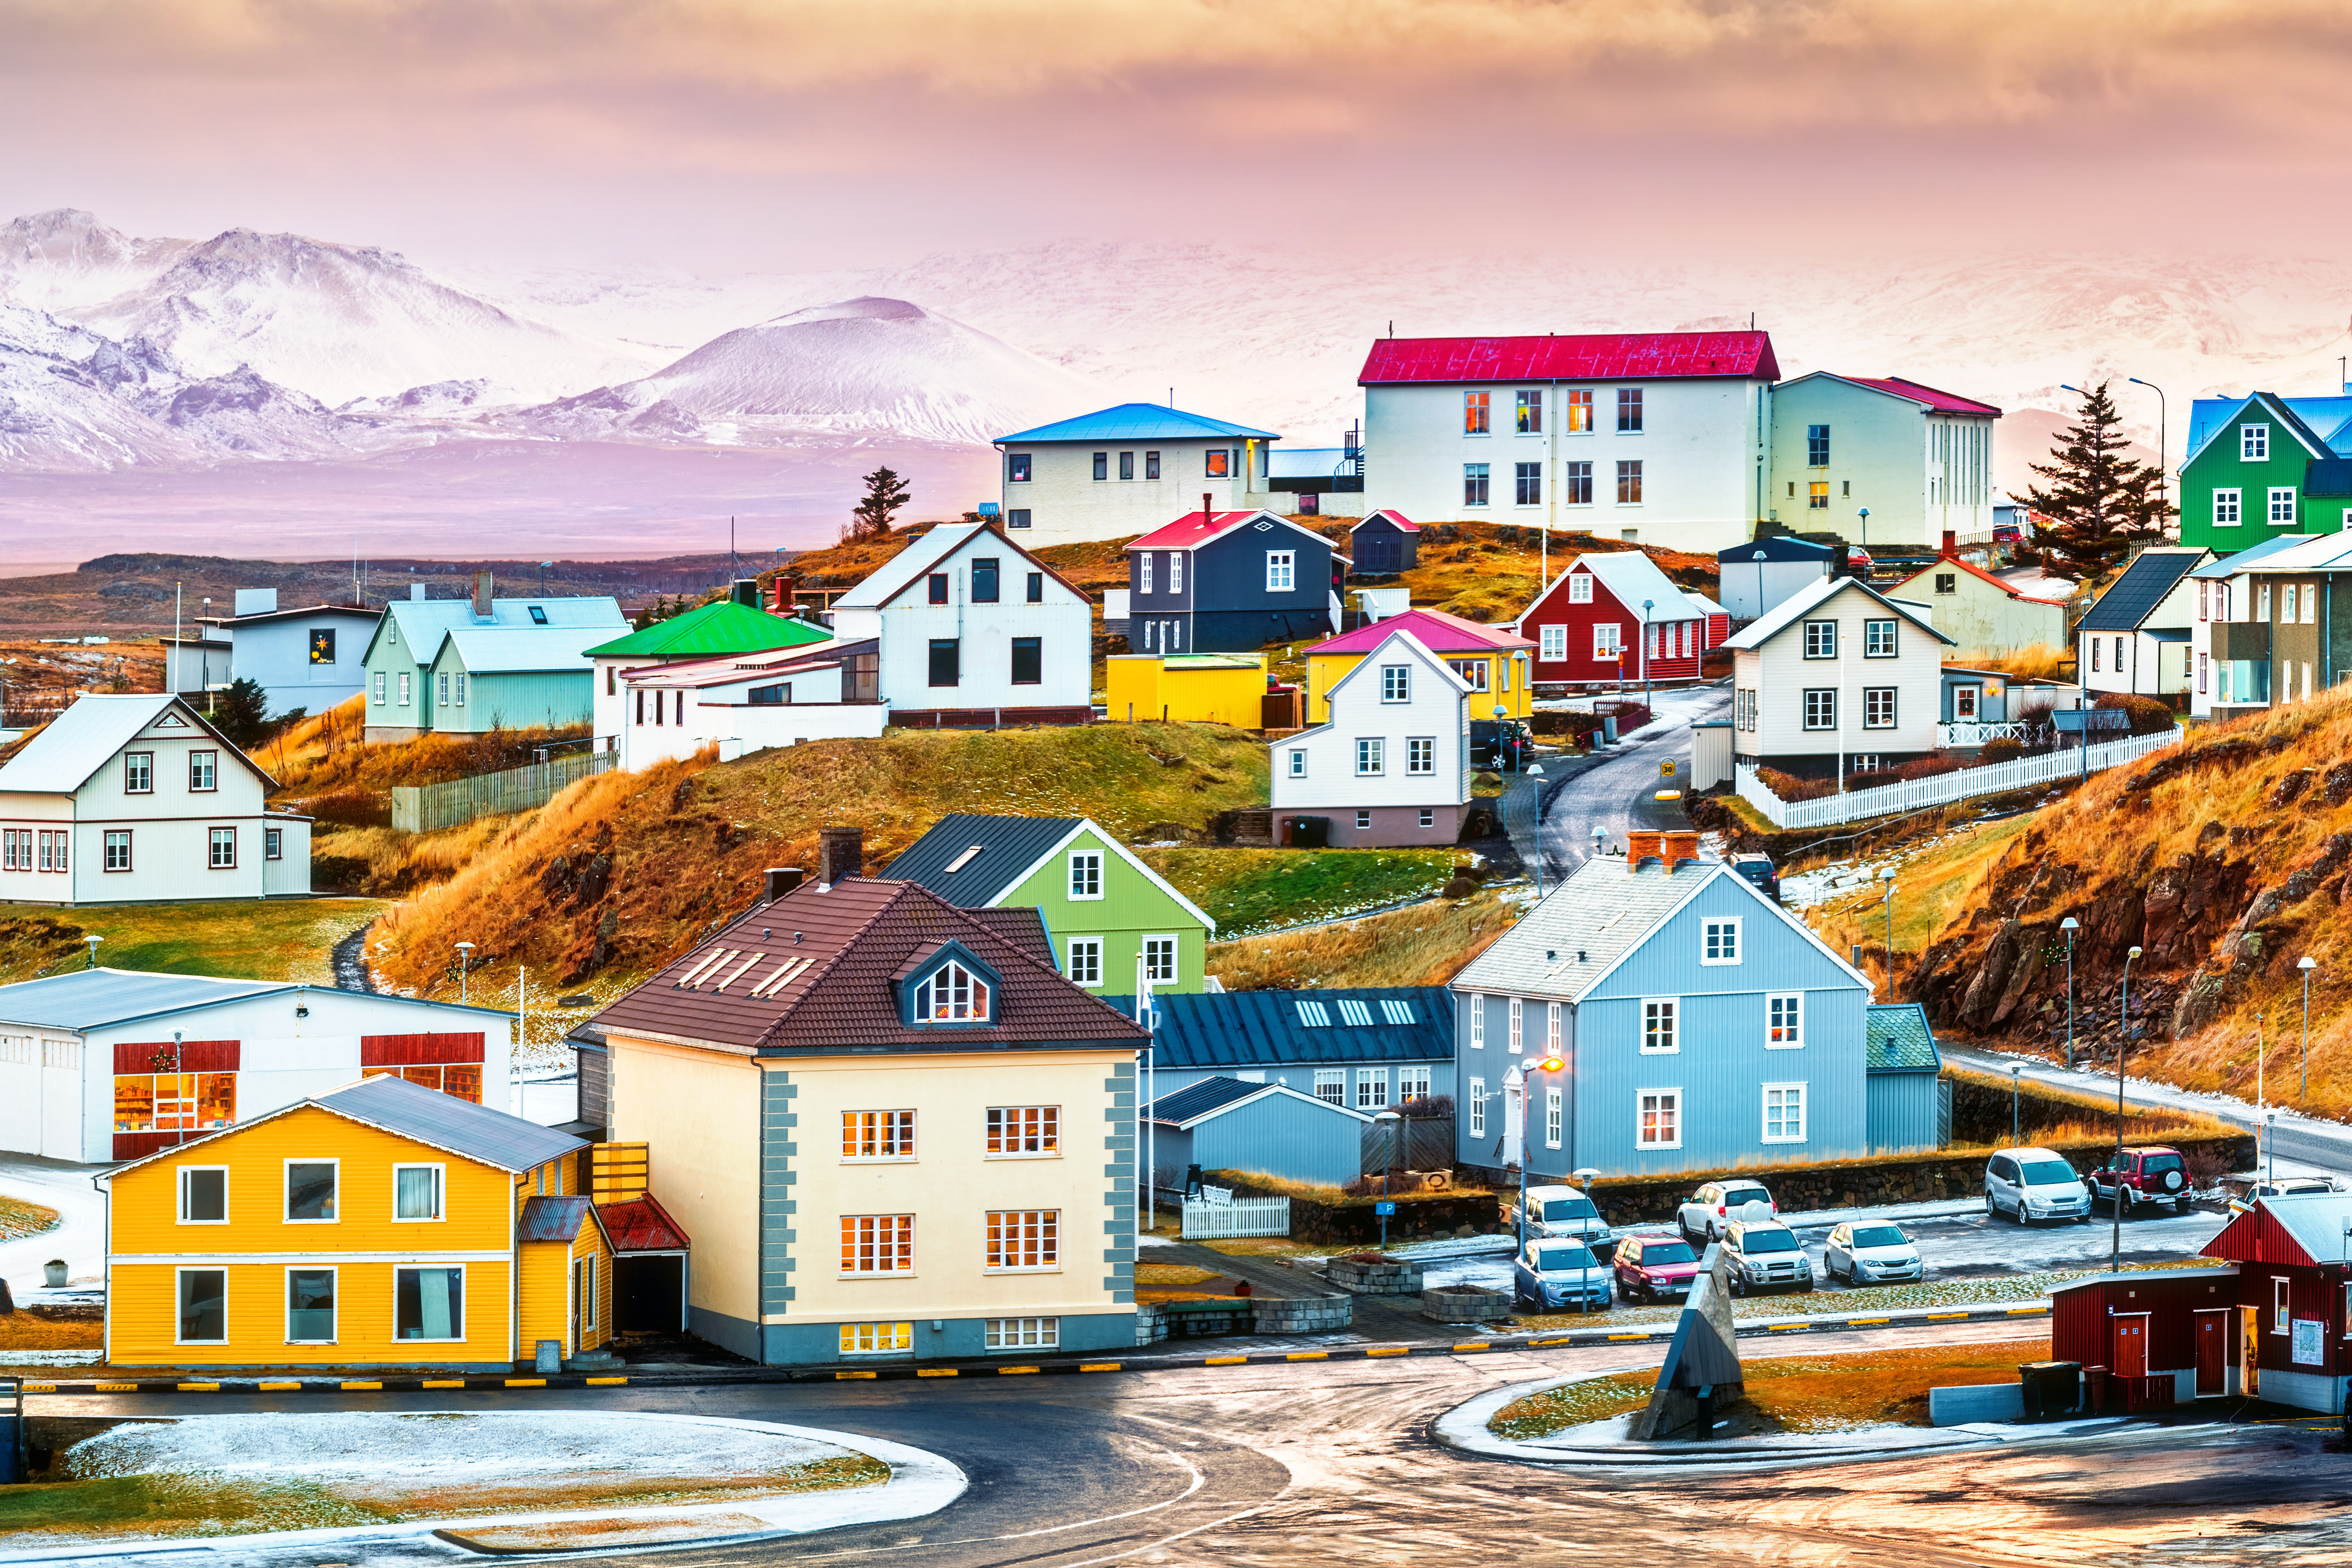 Iceland is one of the safest countries in the world